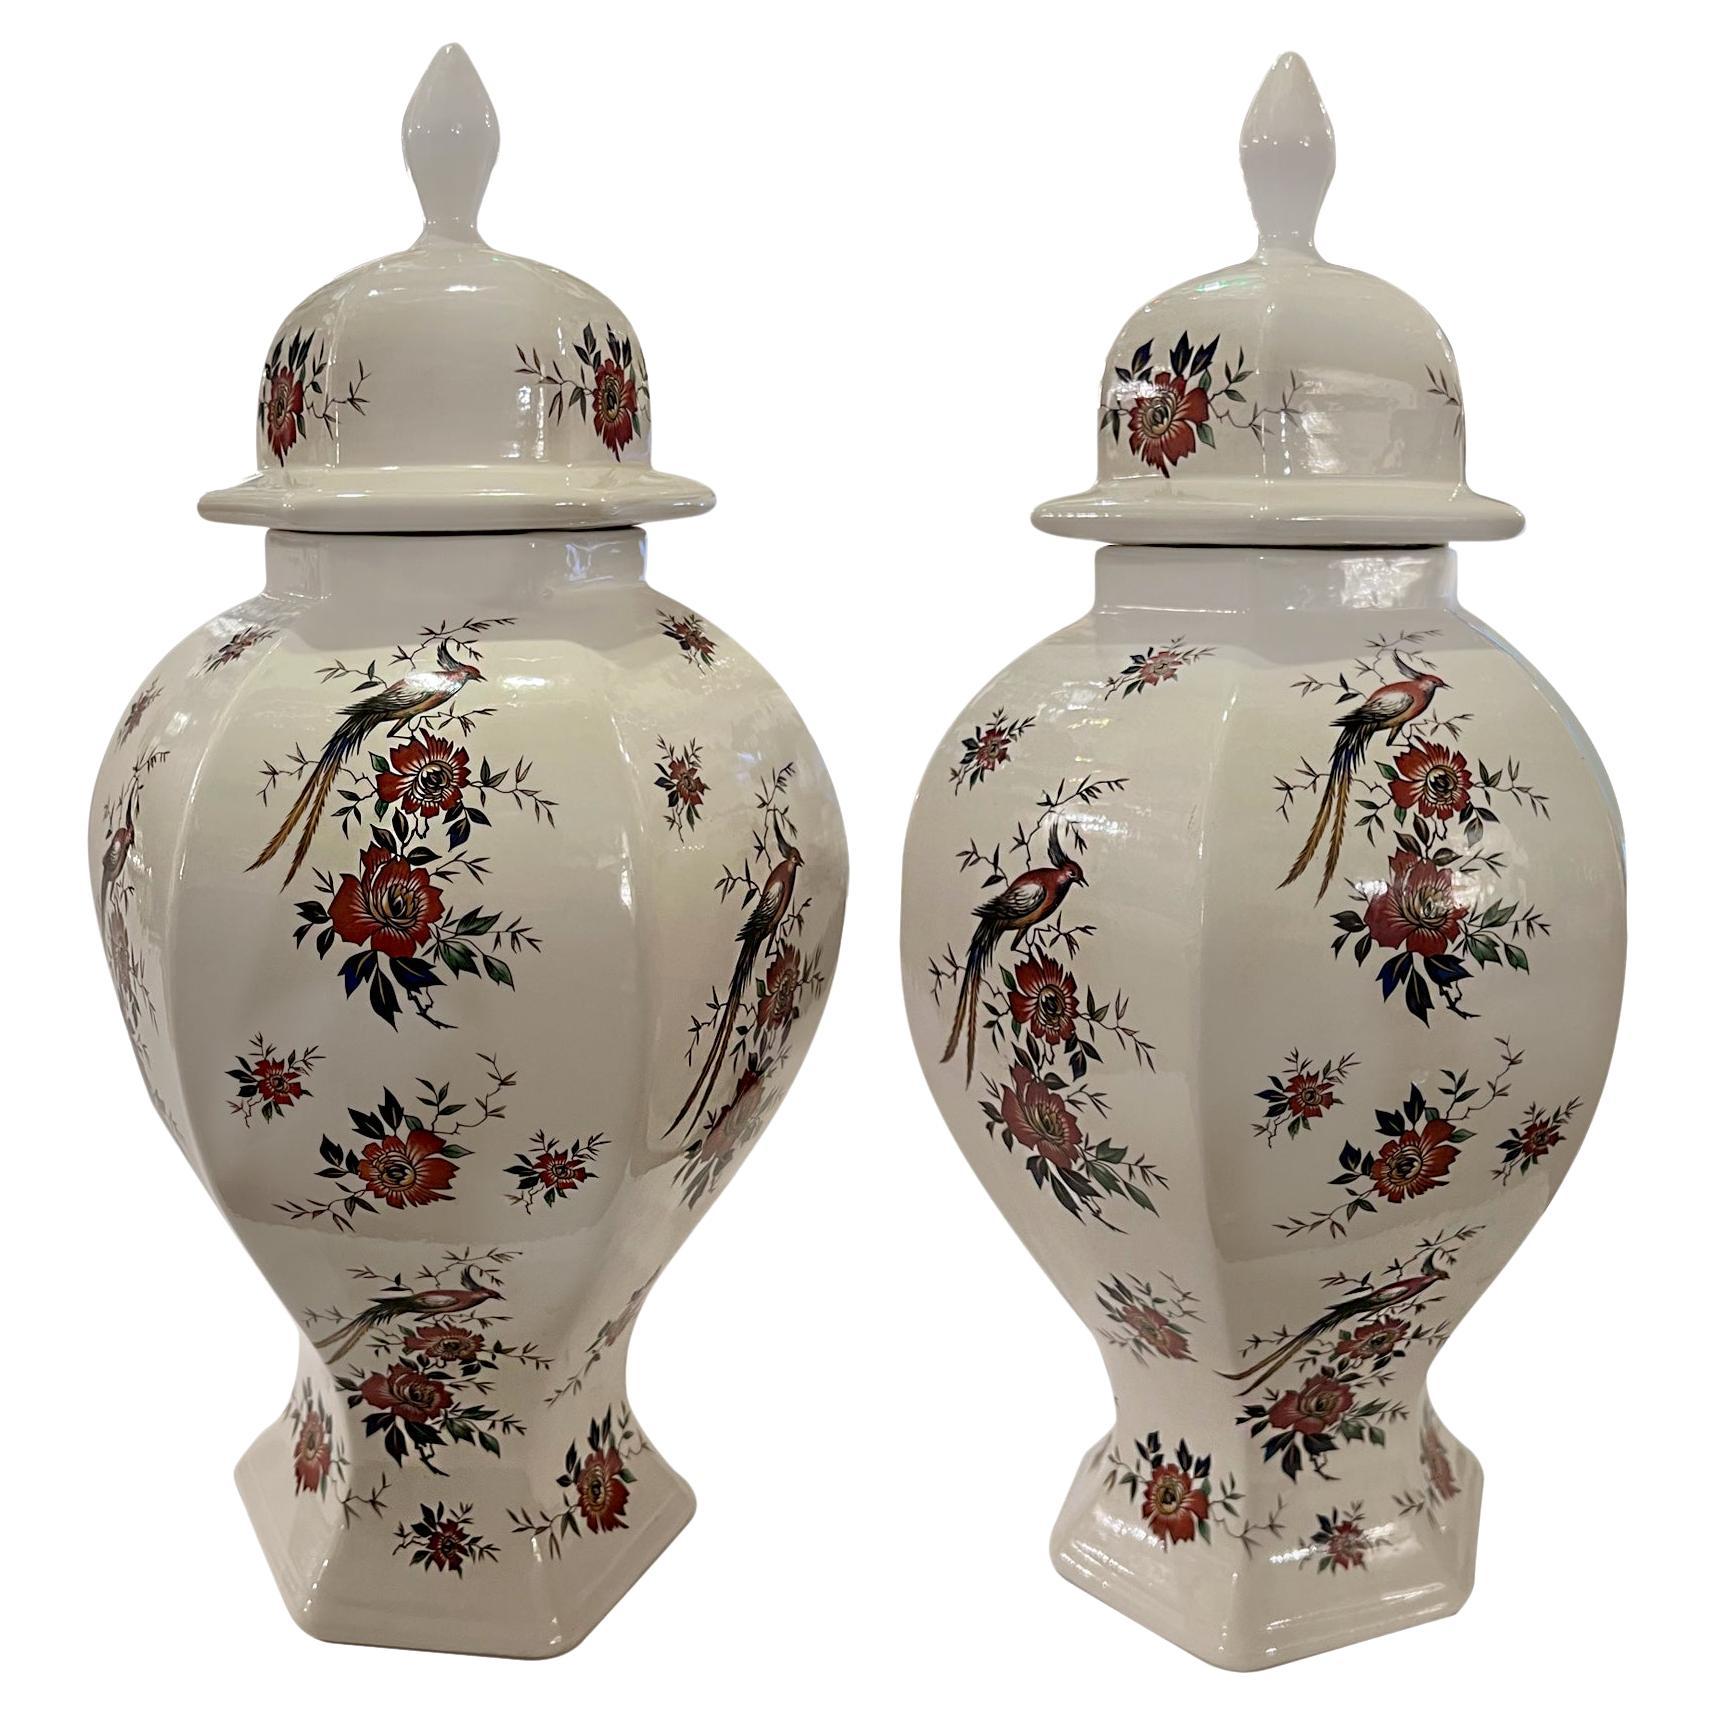 Pair of English Porcelain Covered Jars For Sale